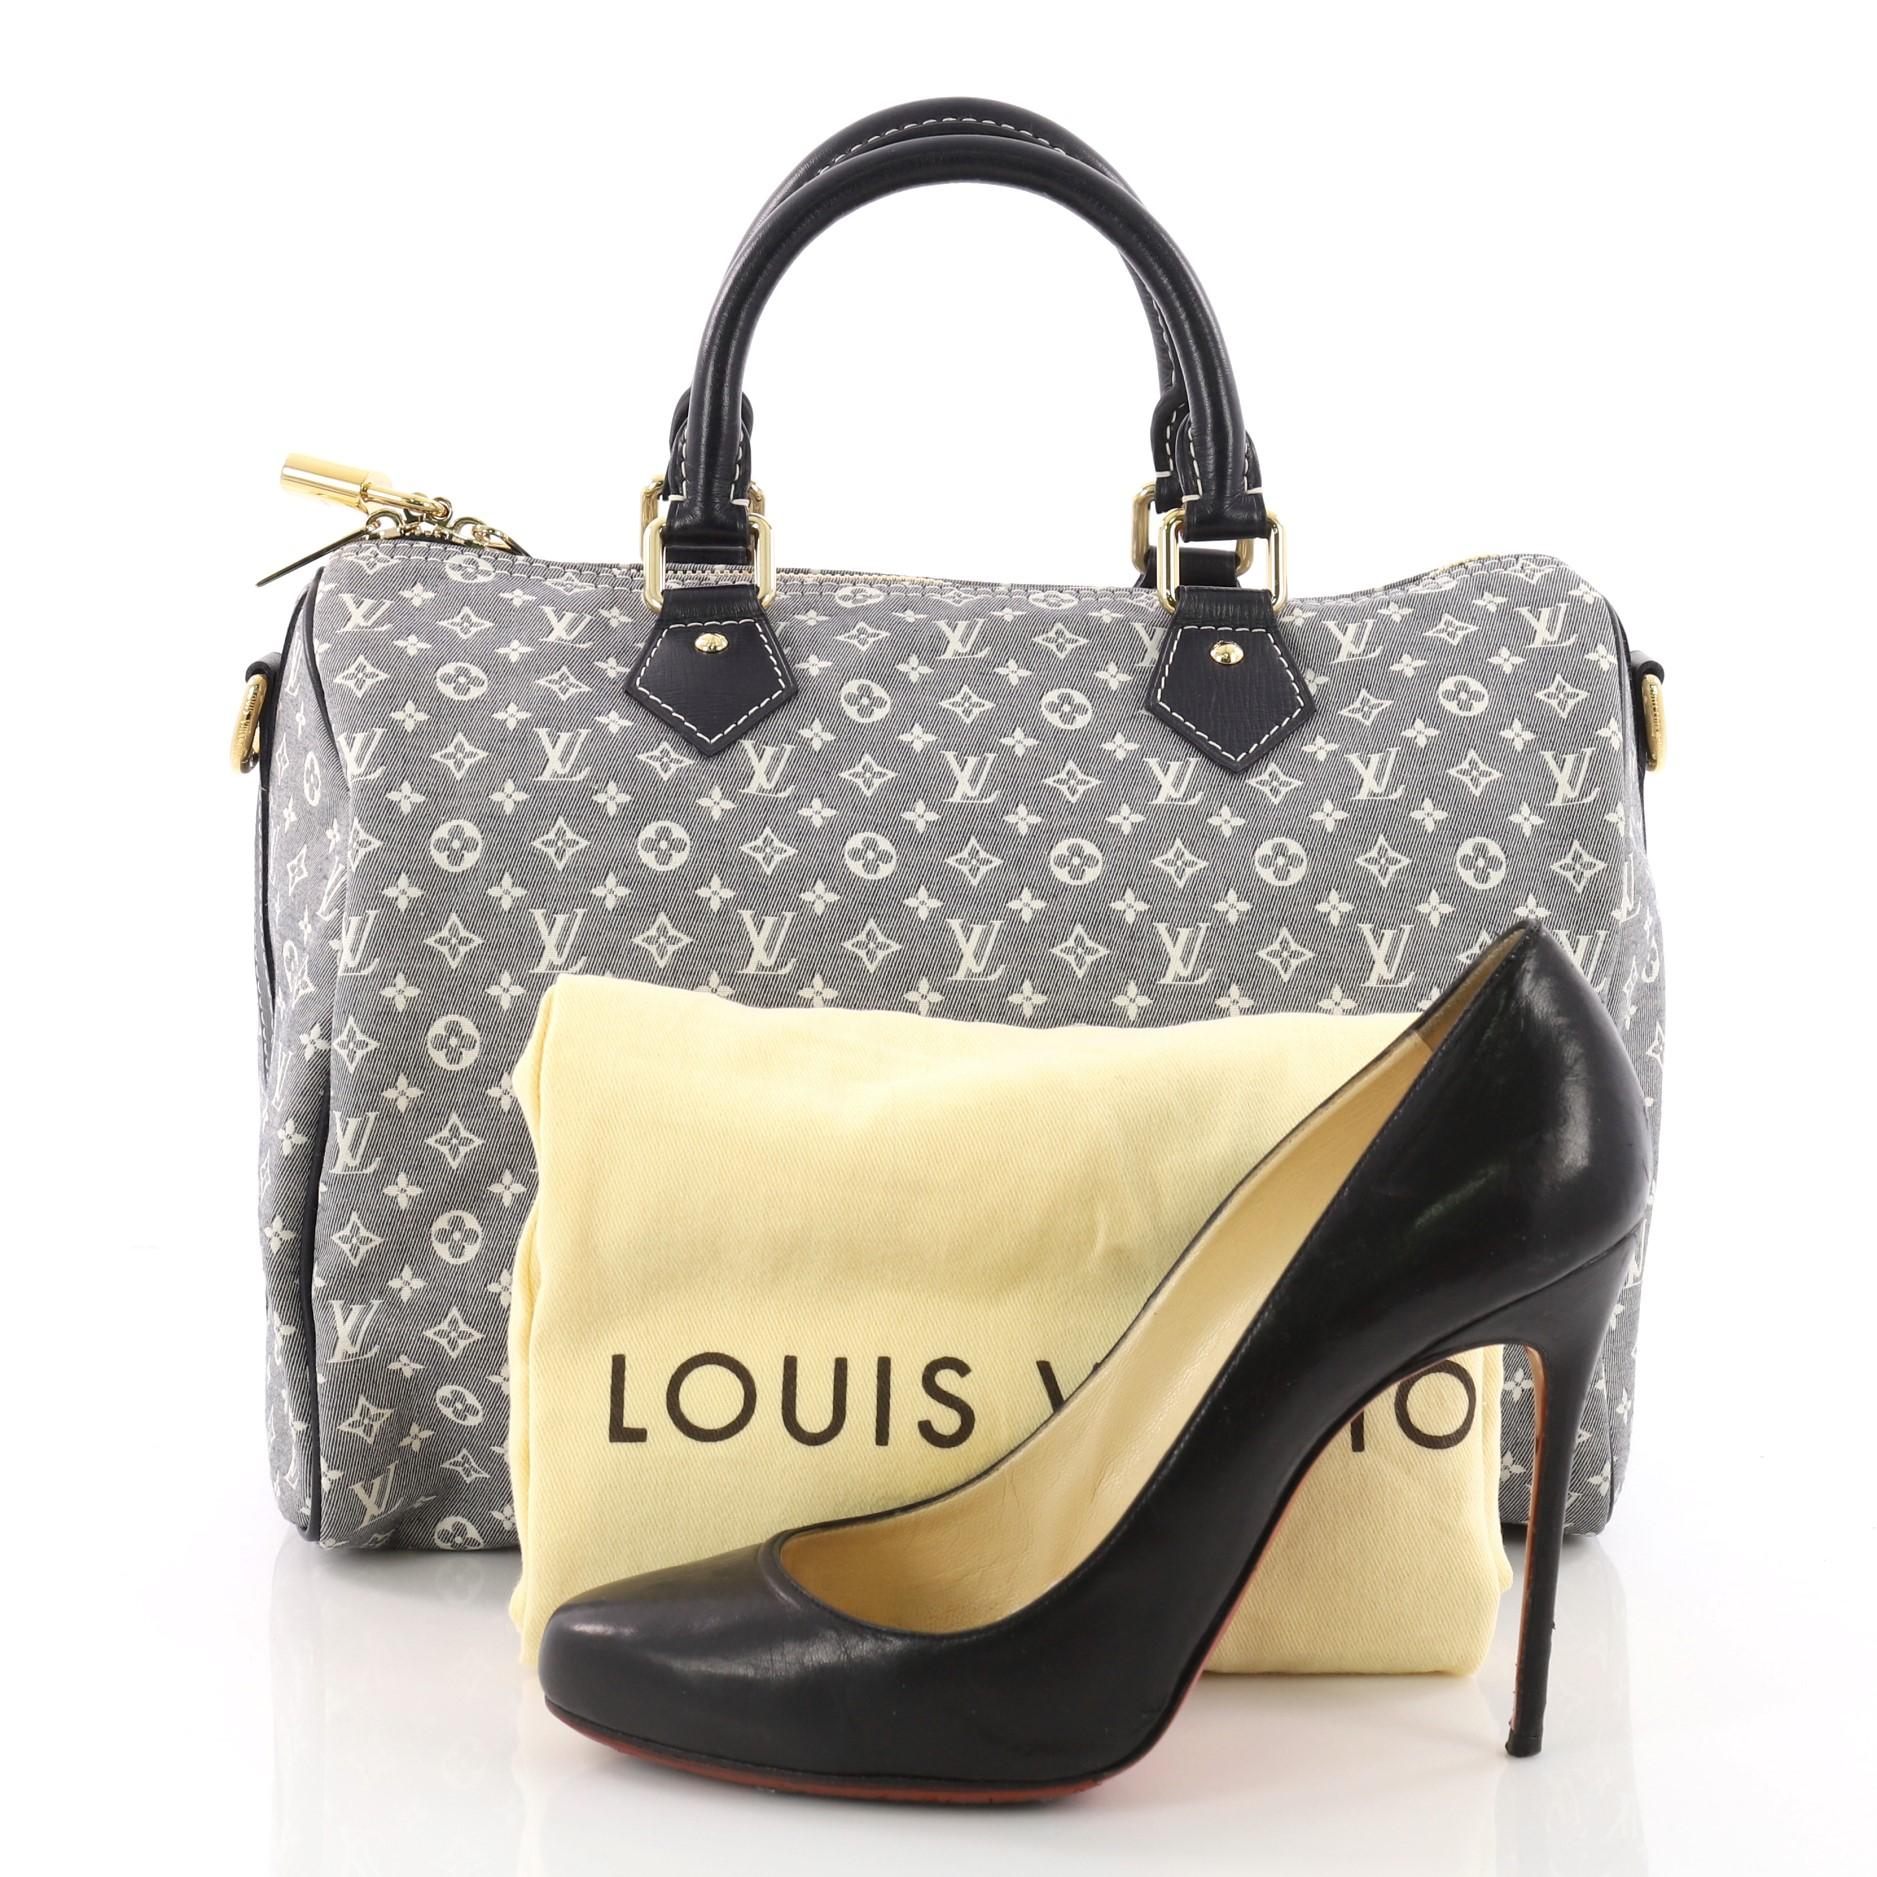 This authentic Louis Vuitton Speedy Bandouliere Bag Monogram Idylle 30 is a classic must-have. Constructed from Louis Vuitton's blue idylle monogram canvas, this fresh Speedy features dual rolled top handles, leather trims, and gold-tone hardware